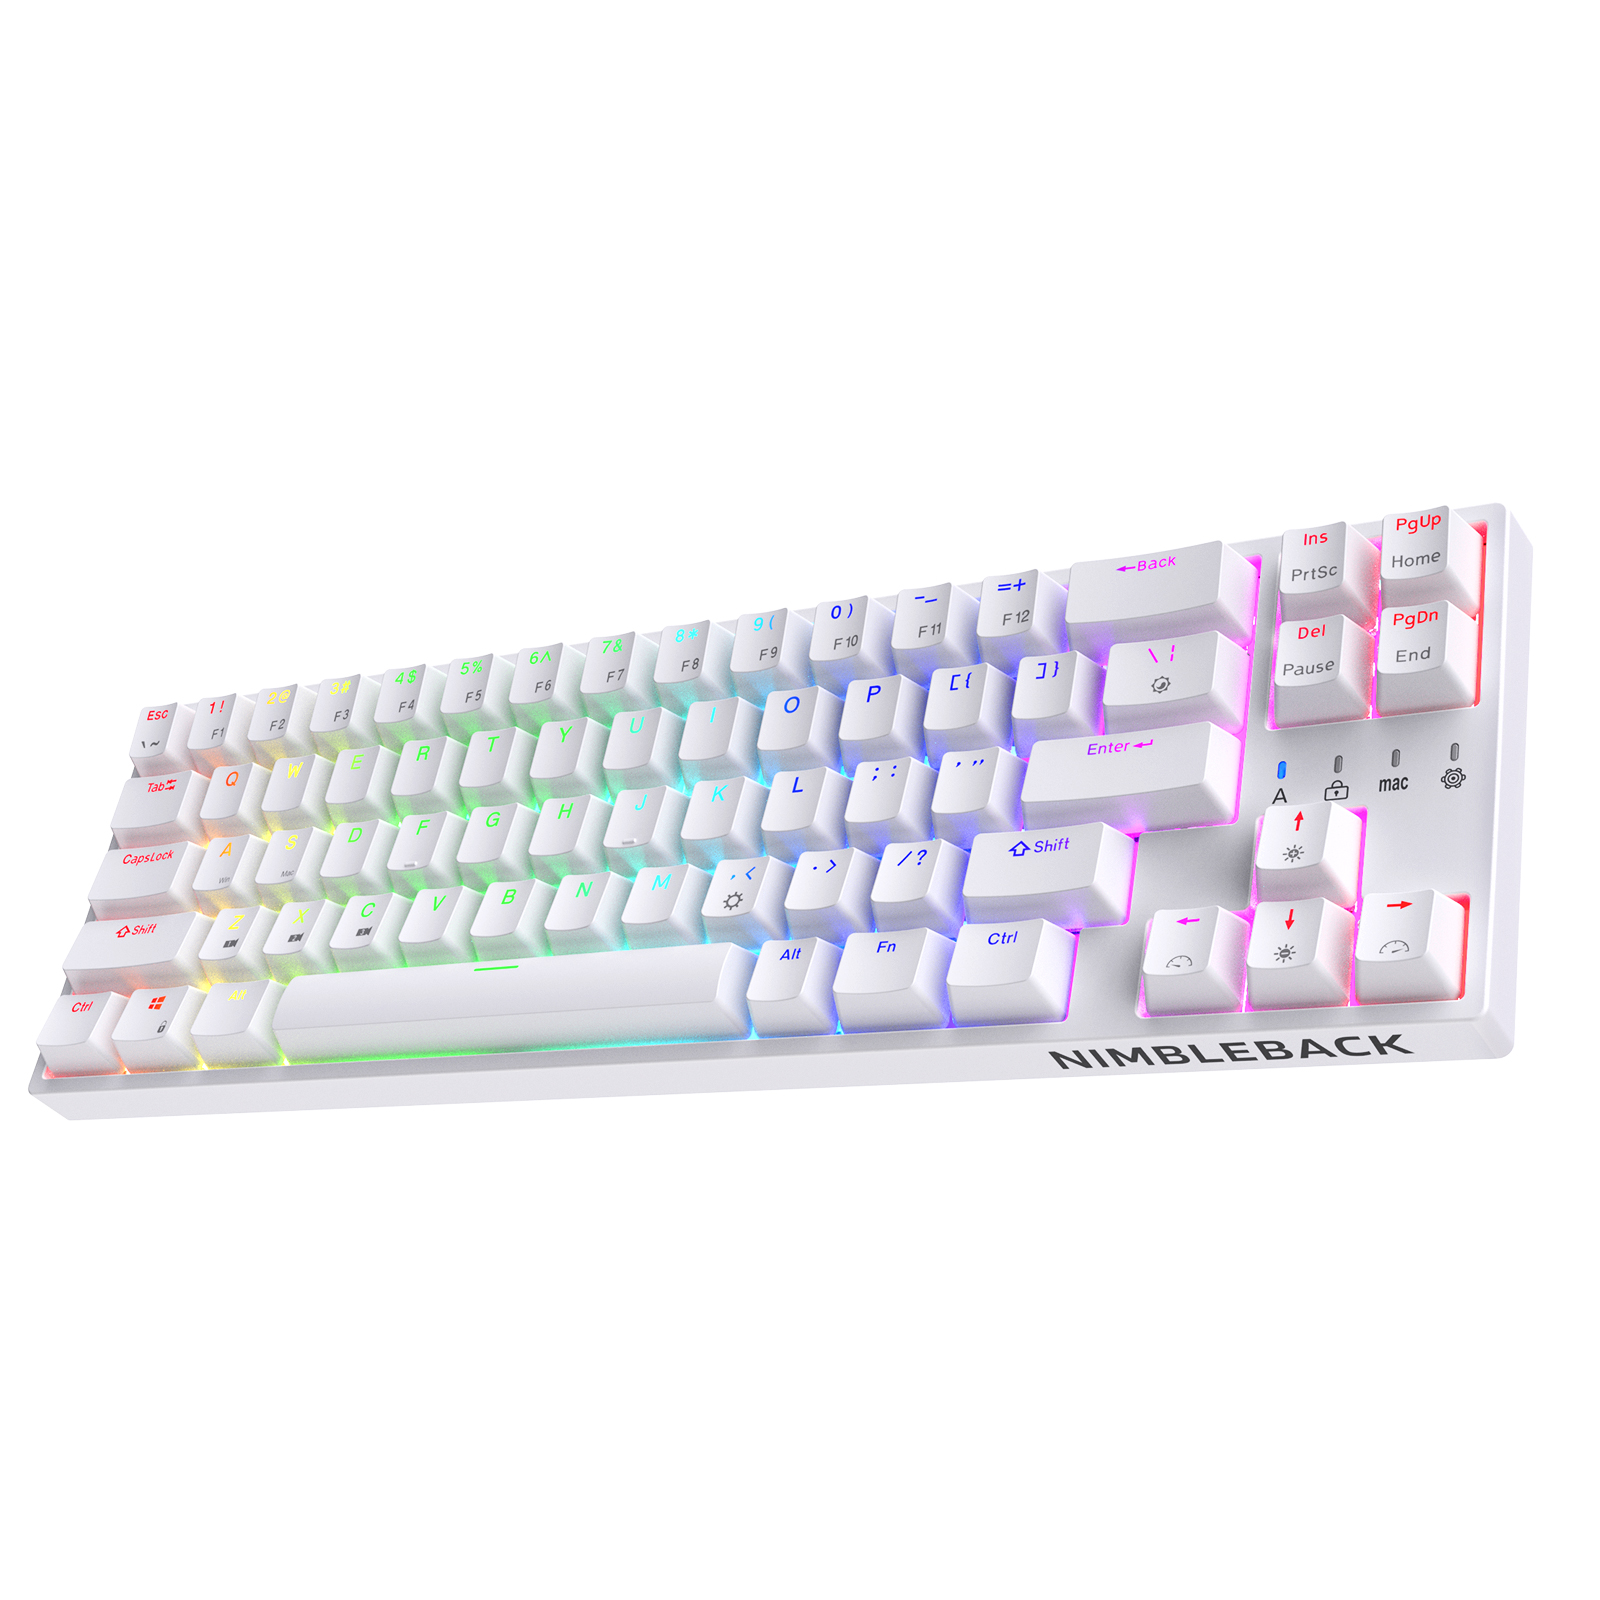 LTC NB681 Nimbleback Wired 65% Mechanical Keyboard, RGB Backlit 68 Keys Gaming Keyboard with Hot-Swappable Red Switch and Stand-Alone Arrow